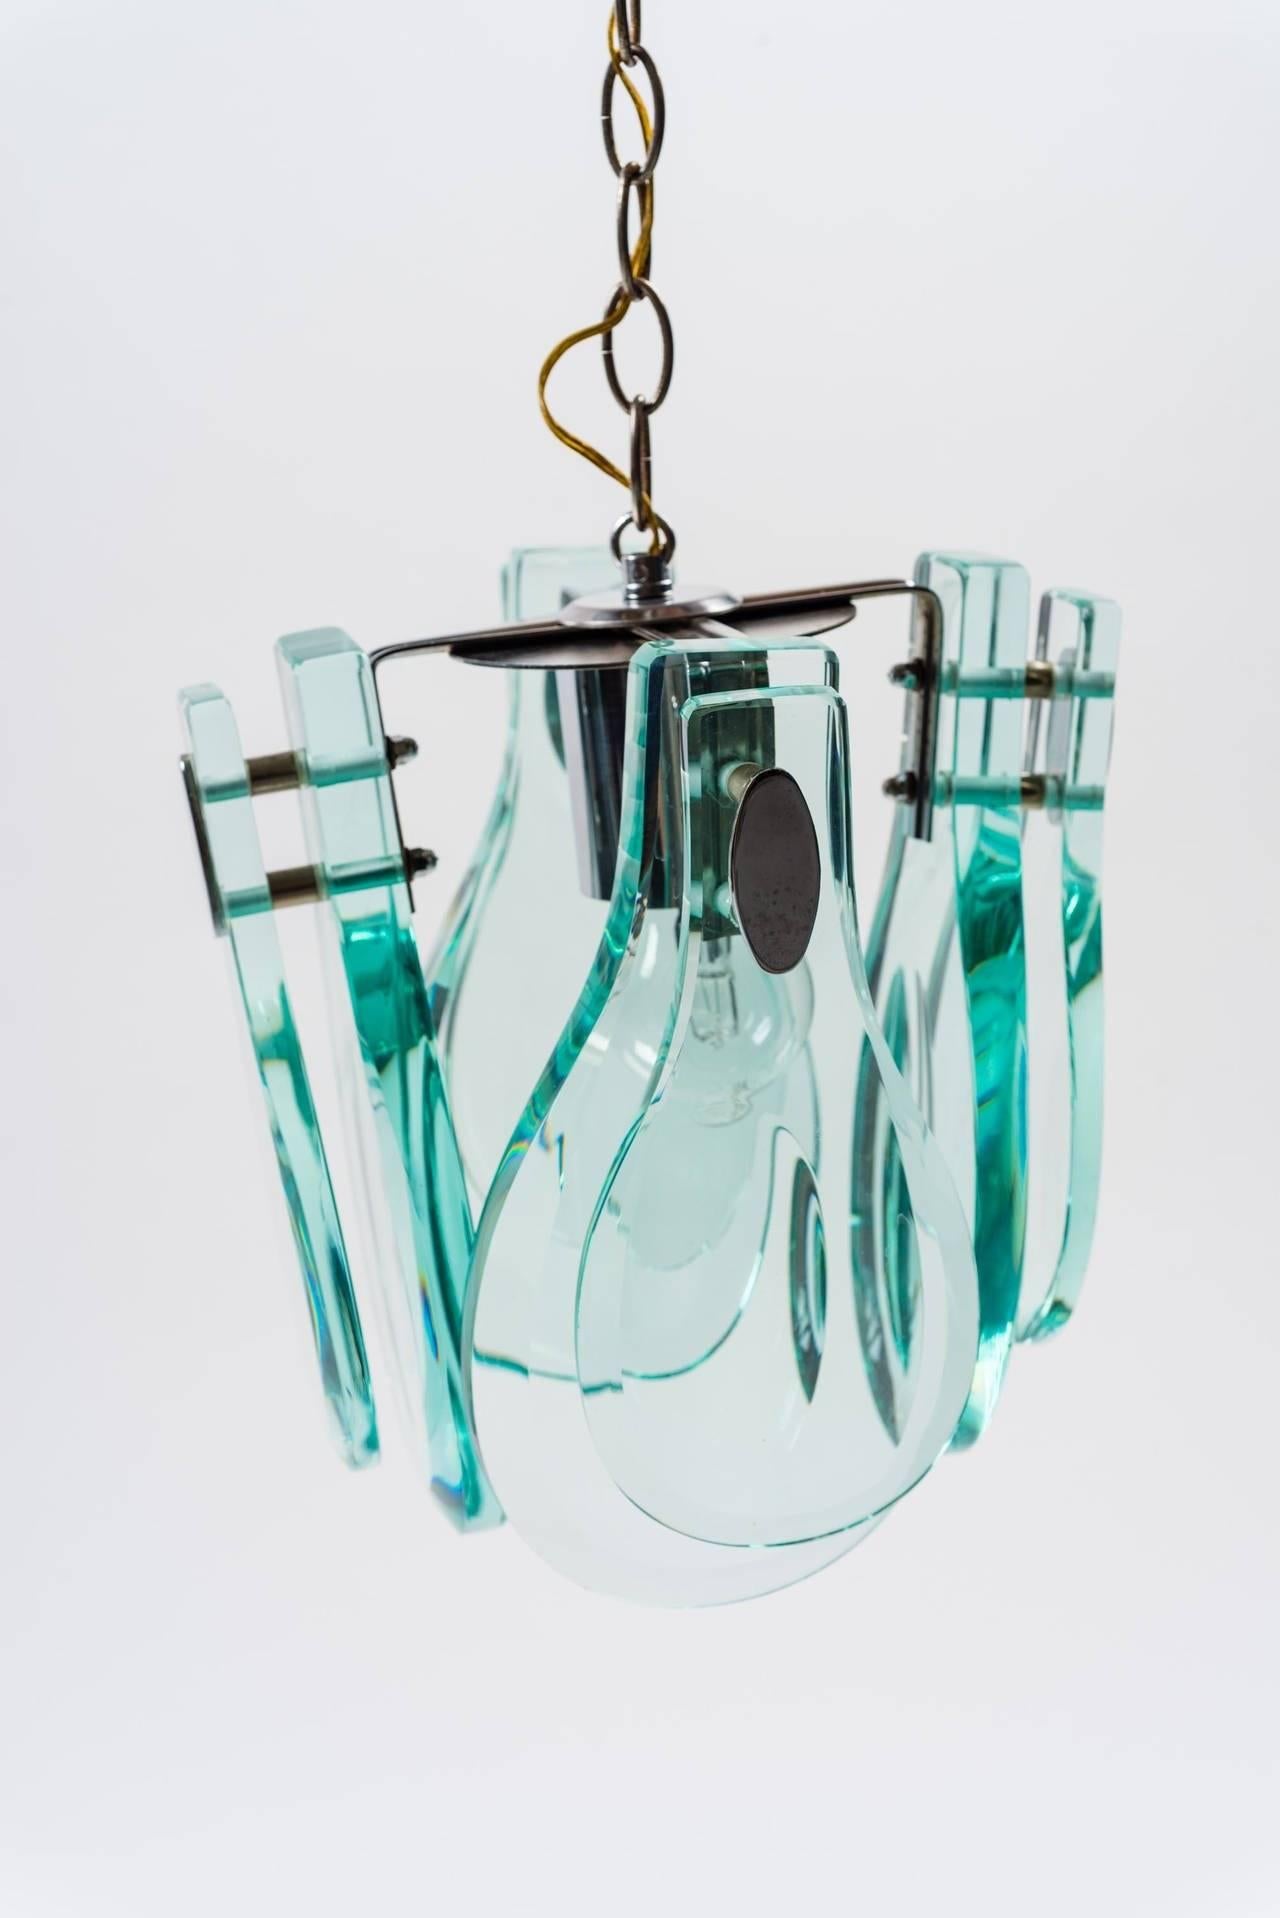 Pendant lamp with hand-sculpted glass Verde Nilo in the style of Fontana Arte, Italy, 1970.